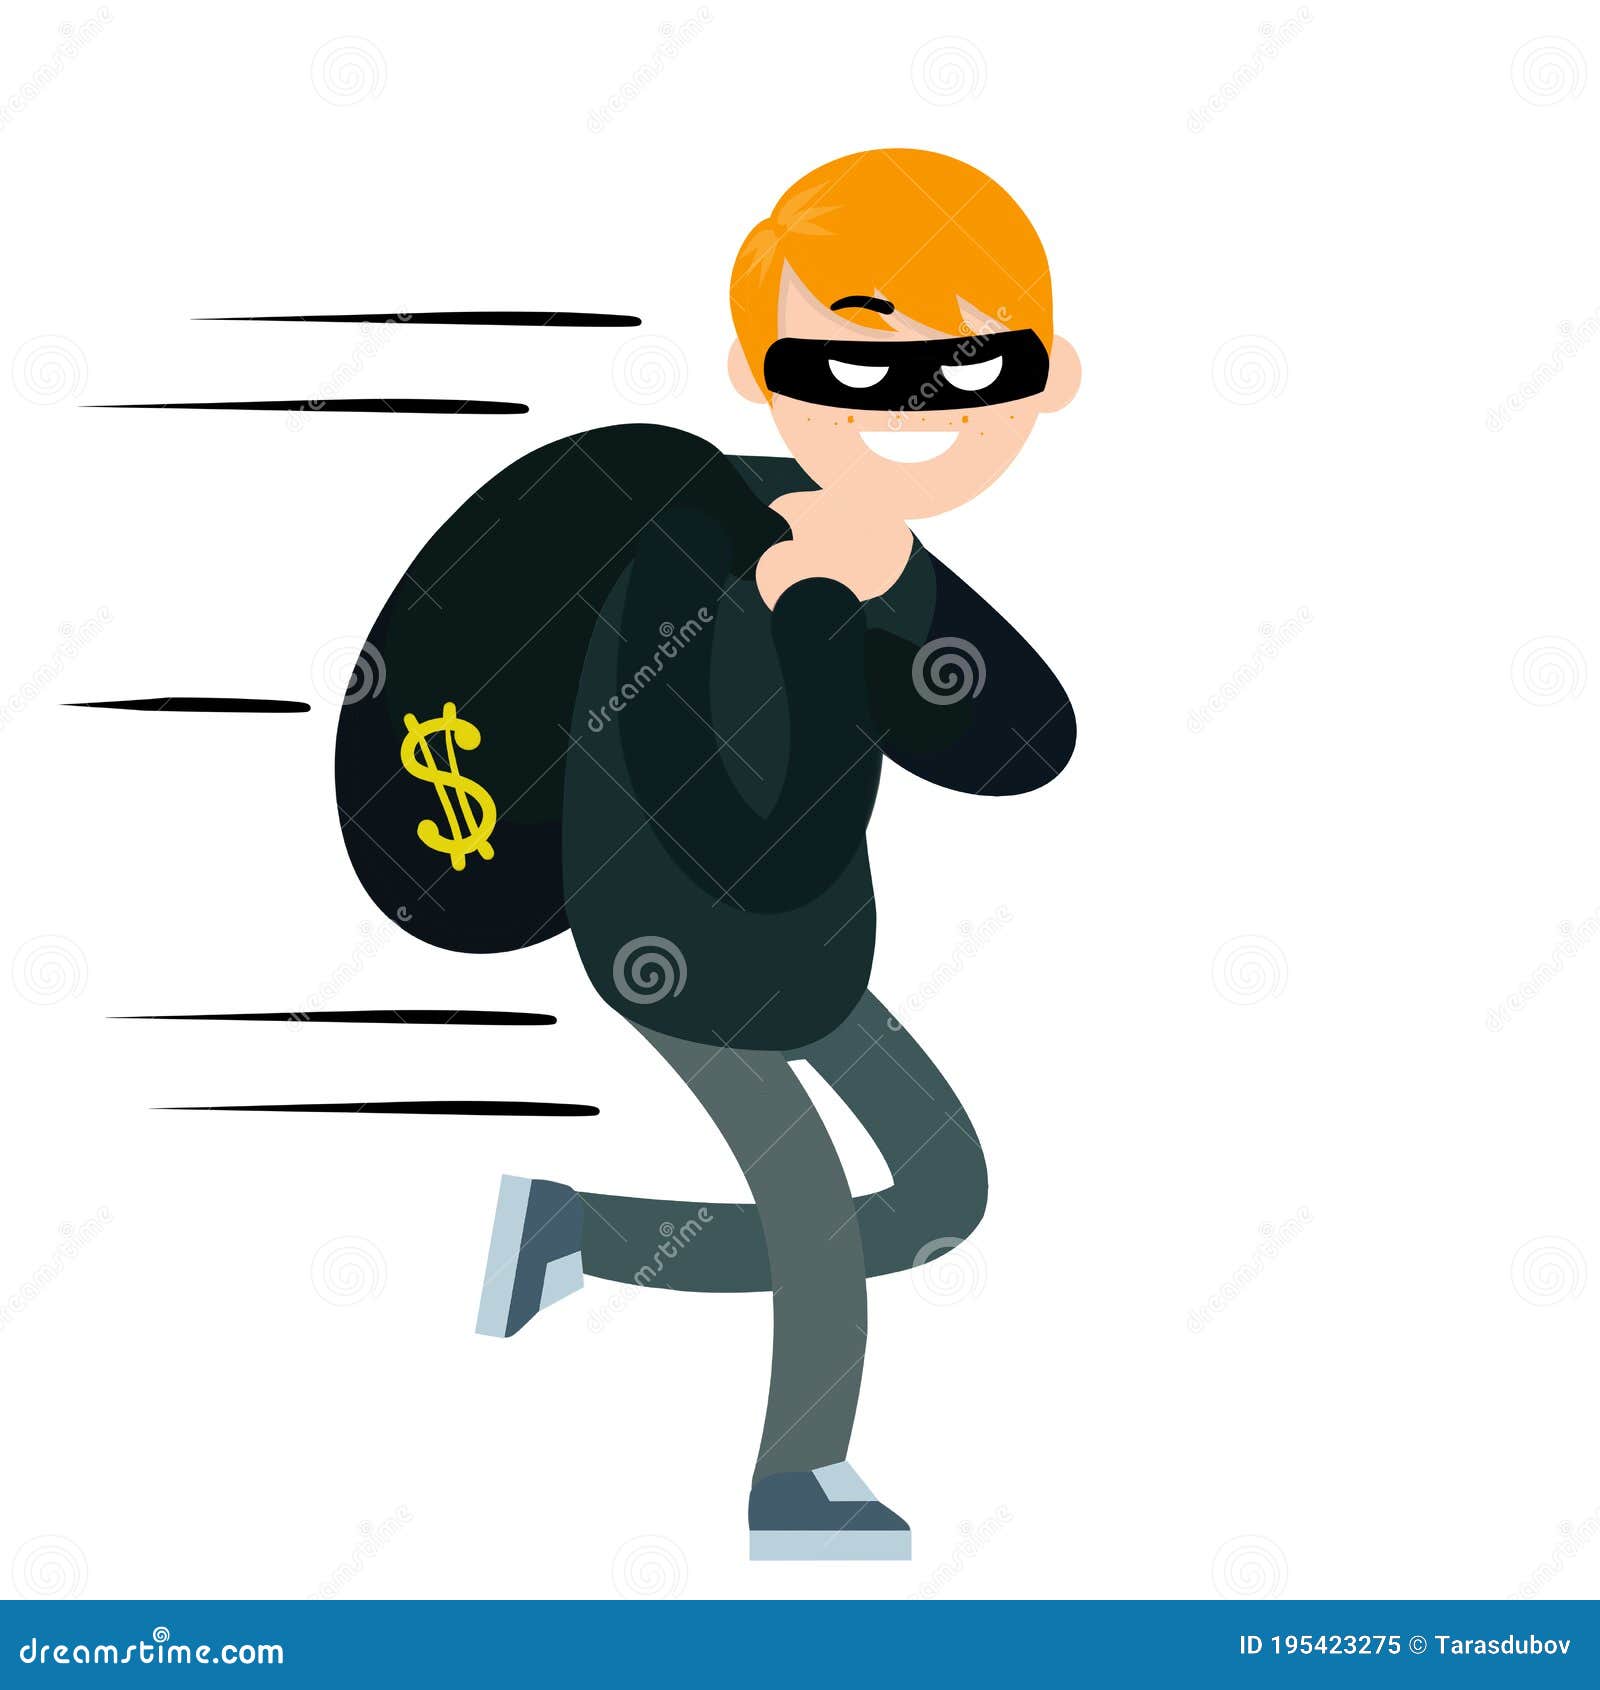 Bank robbery crime flat Royalty Free Vector Image